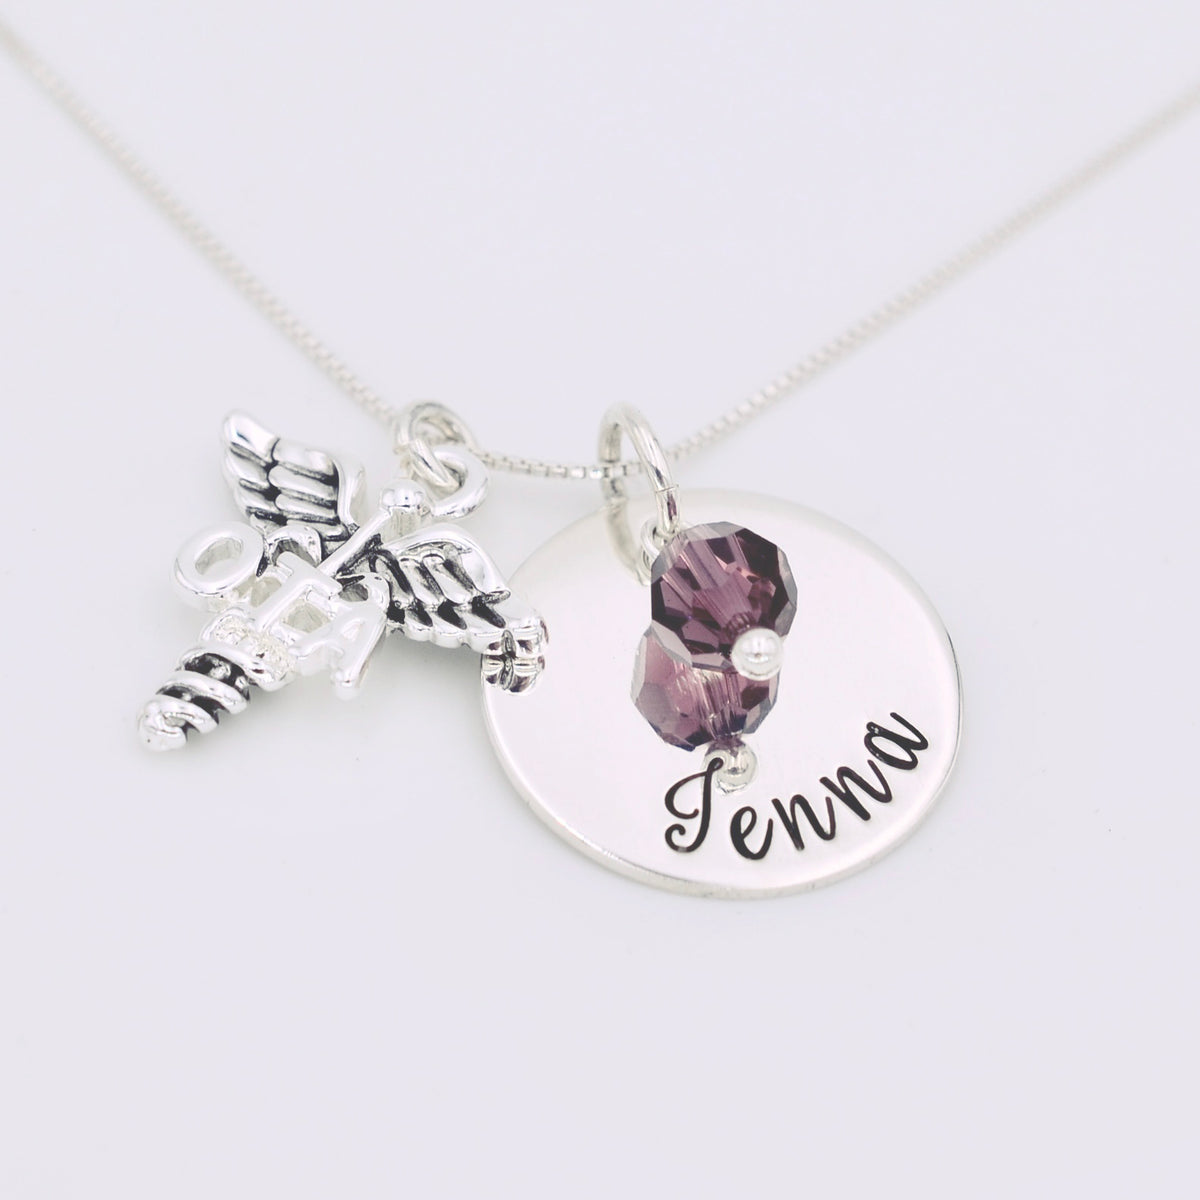 Nurse / Medical Profession Personalized Necklace - Love It Personalized